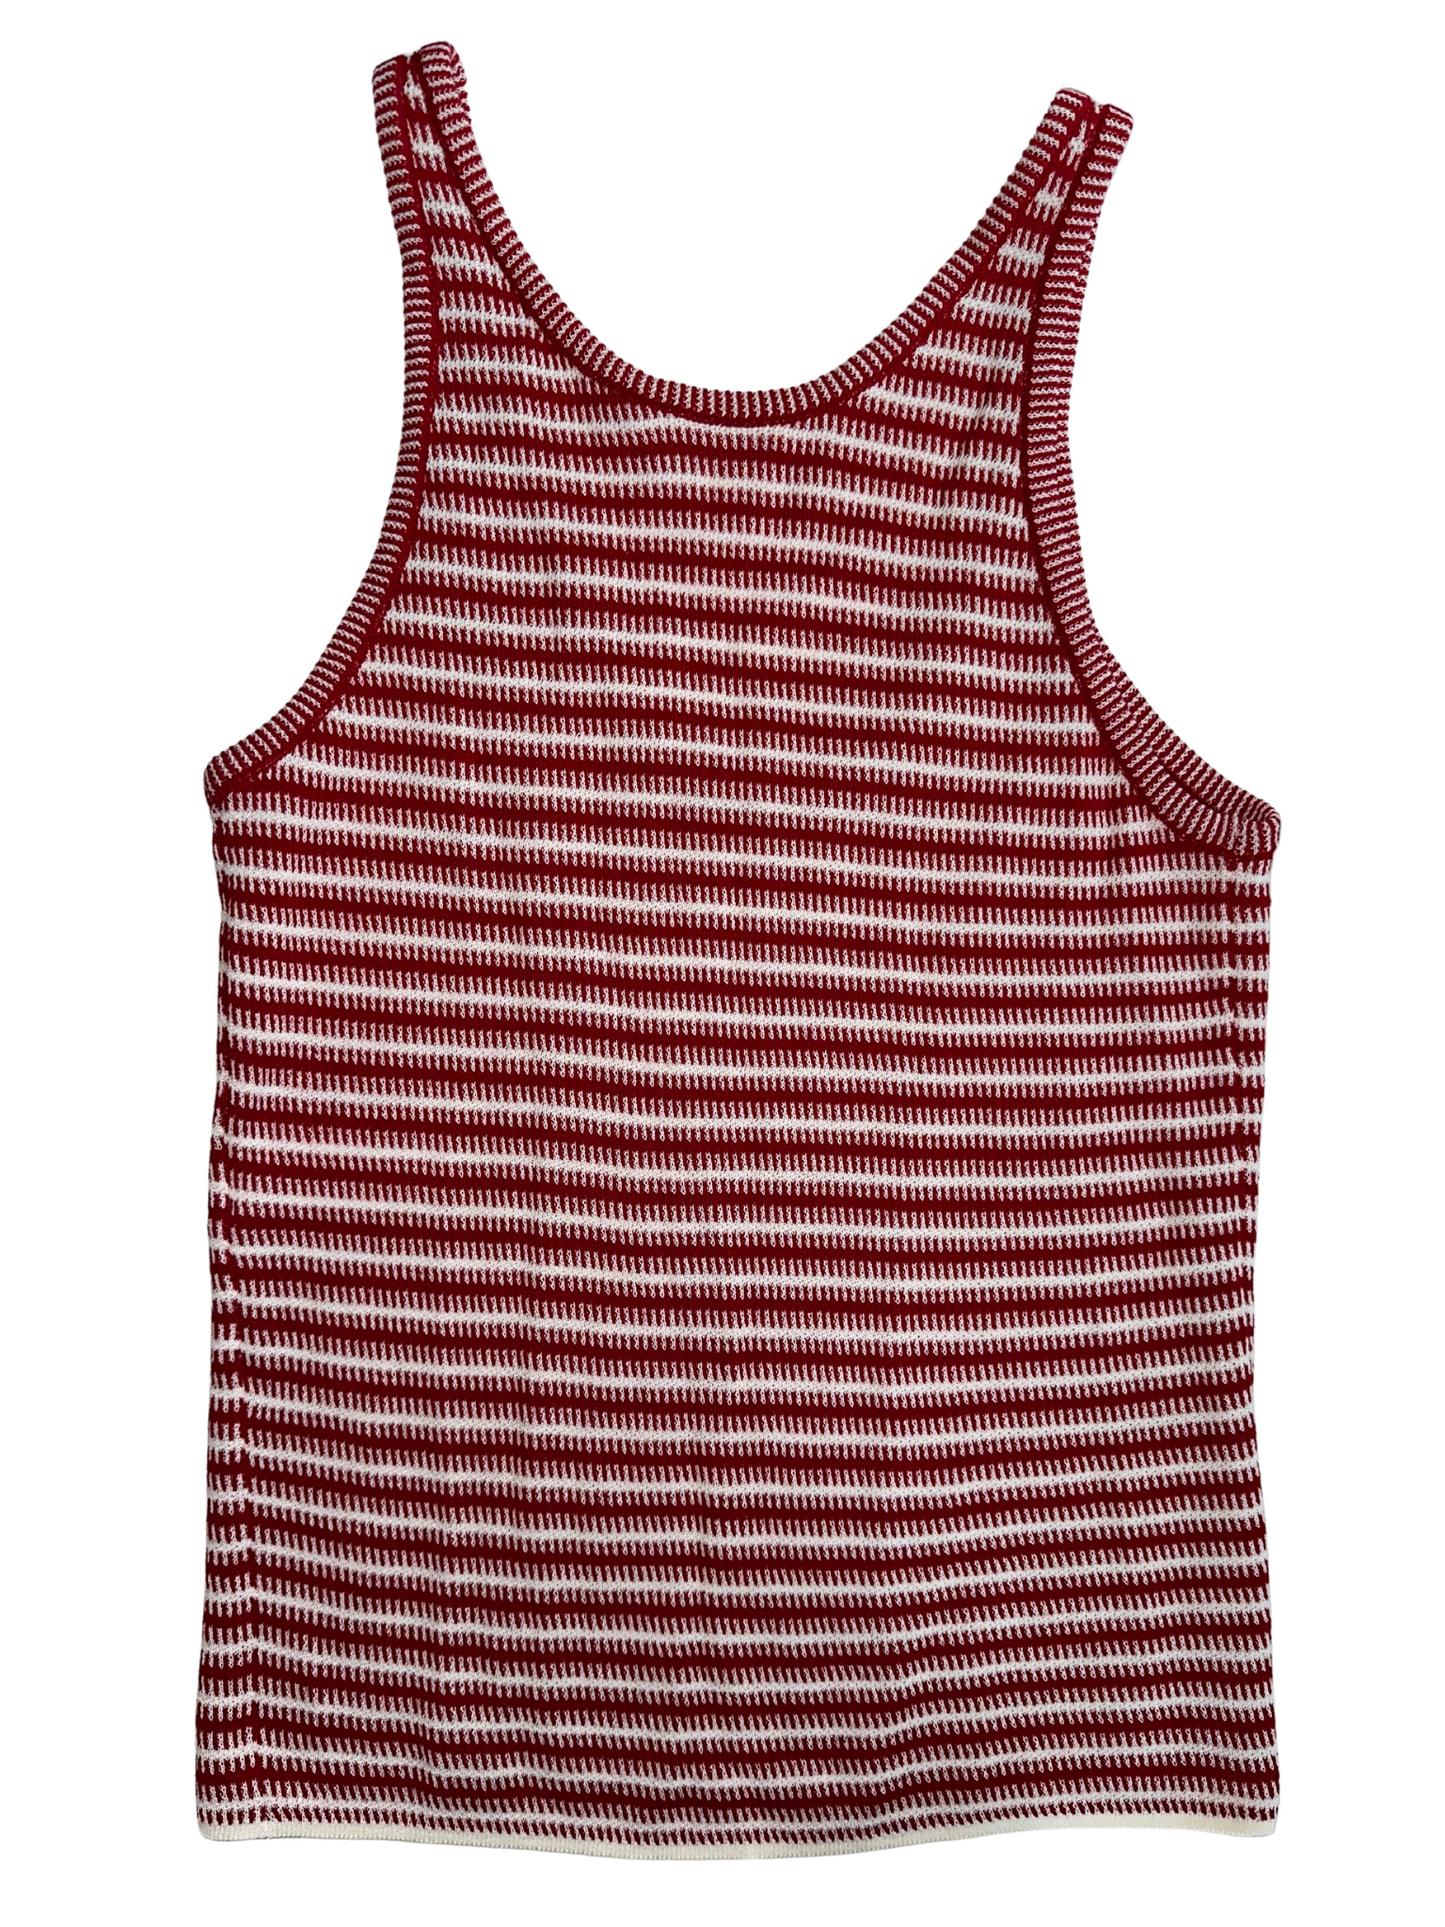 Chloé Scoop Neck Striped Cotton Knitted Tank Top Size M